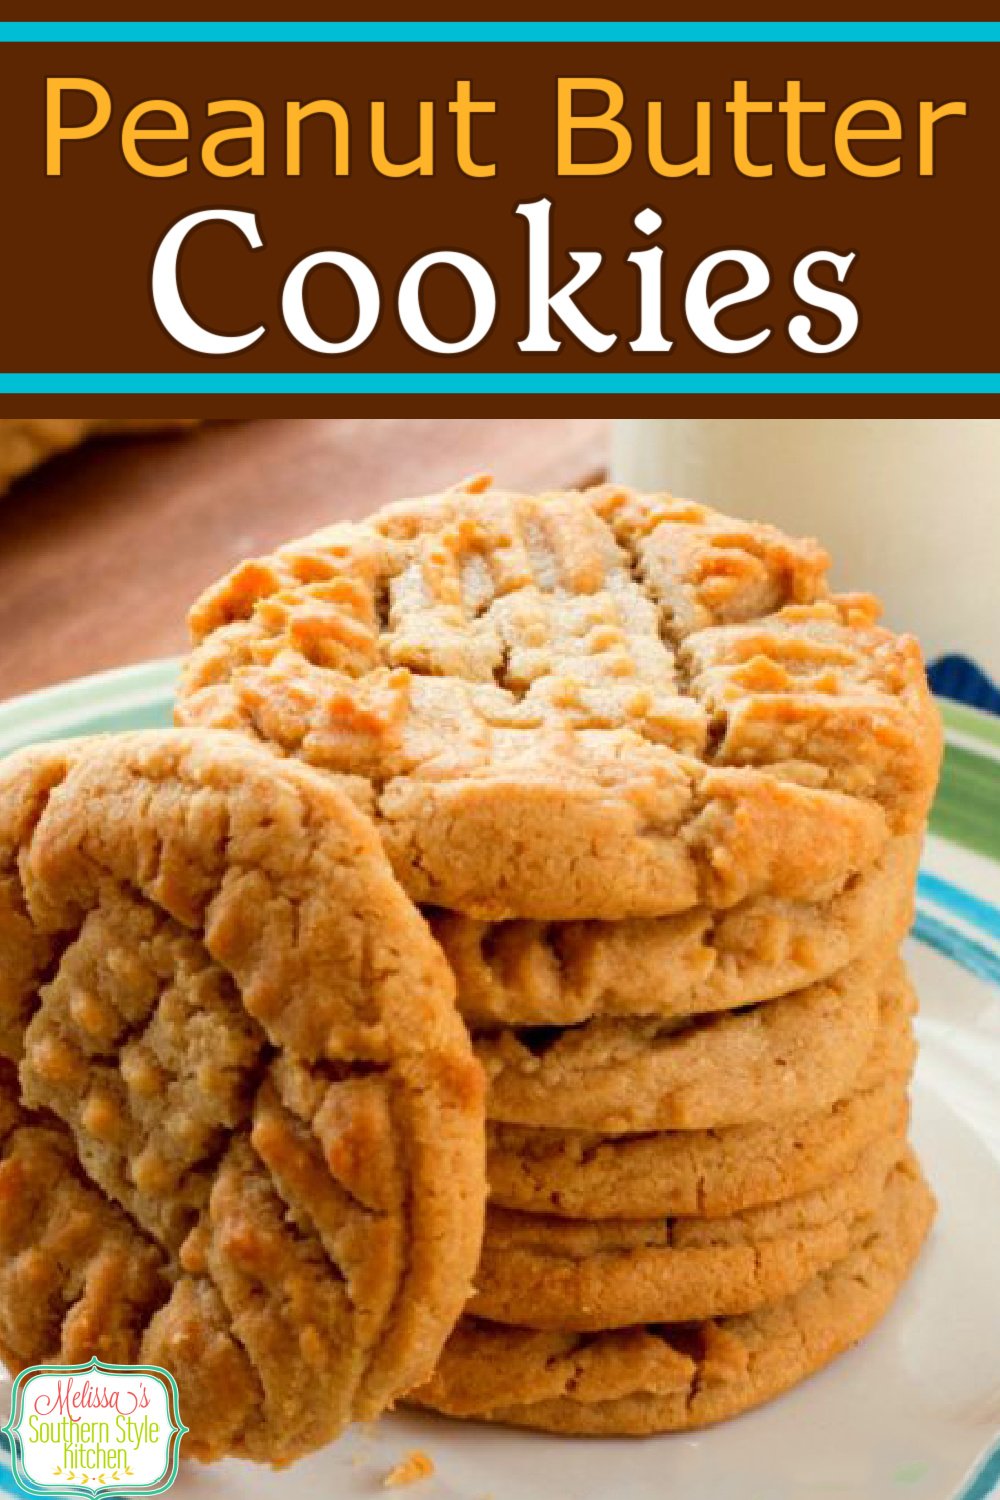 These Classic Soft Peanut Butter Cookies pack a taste of nostalgia in every bite #peanutbuttercookies #classicpeanutbuttercookies #cookies #cookierecipes #holidaybaking #christmascookies #holidays #peanutbutter #comfortfcood #kidfriendly #southernfood #southernrecipes via @melissasssk